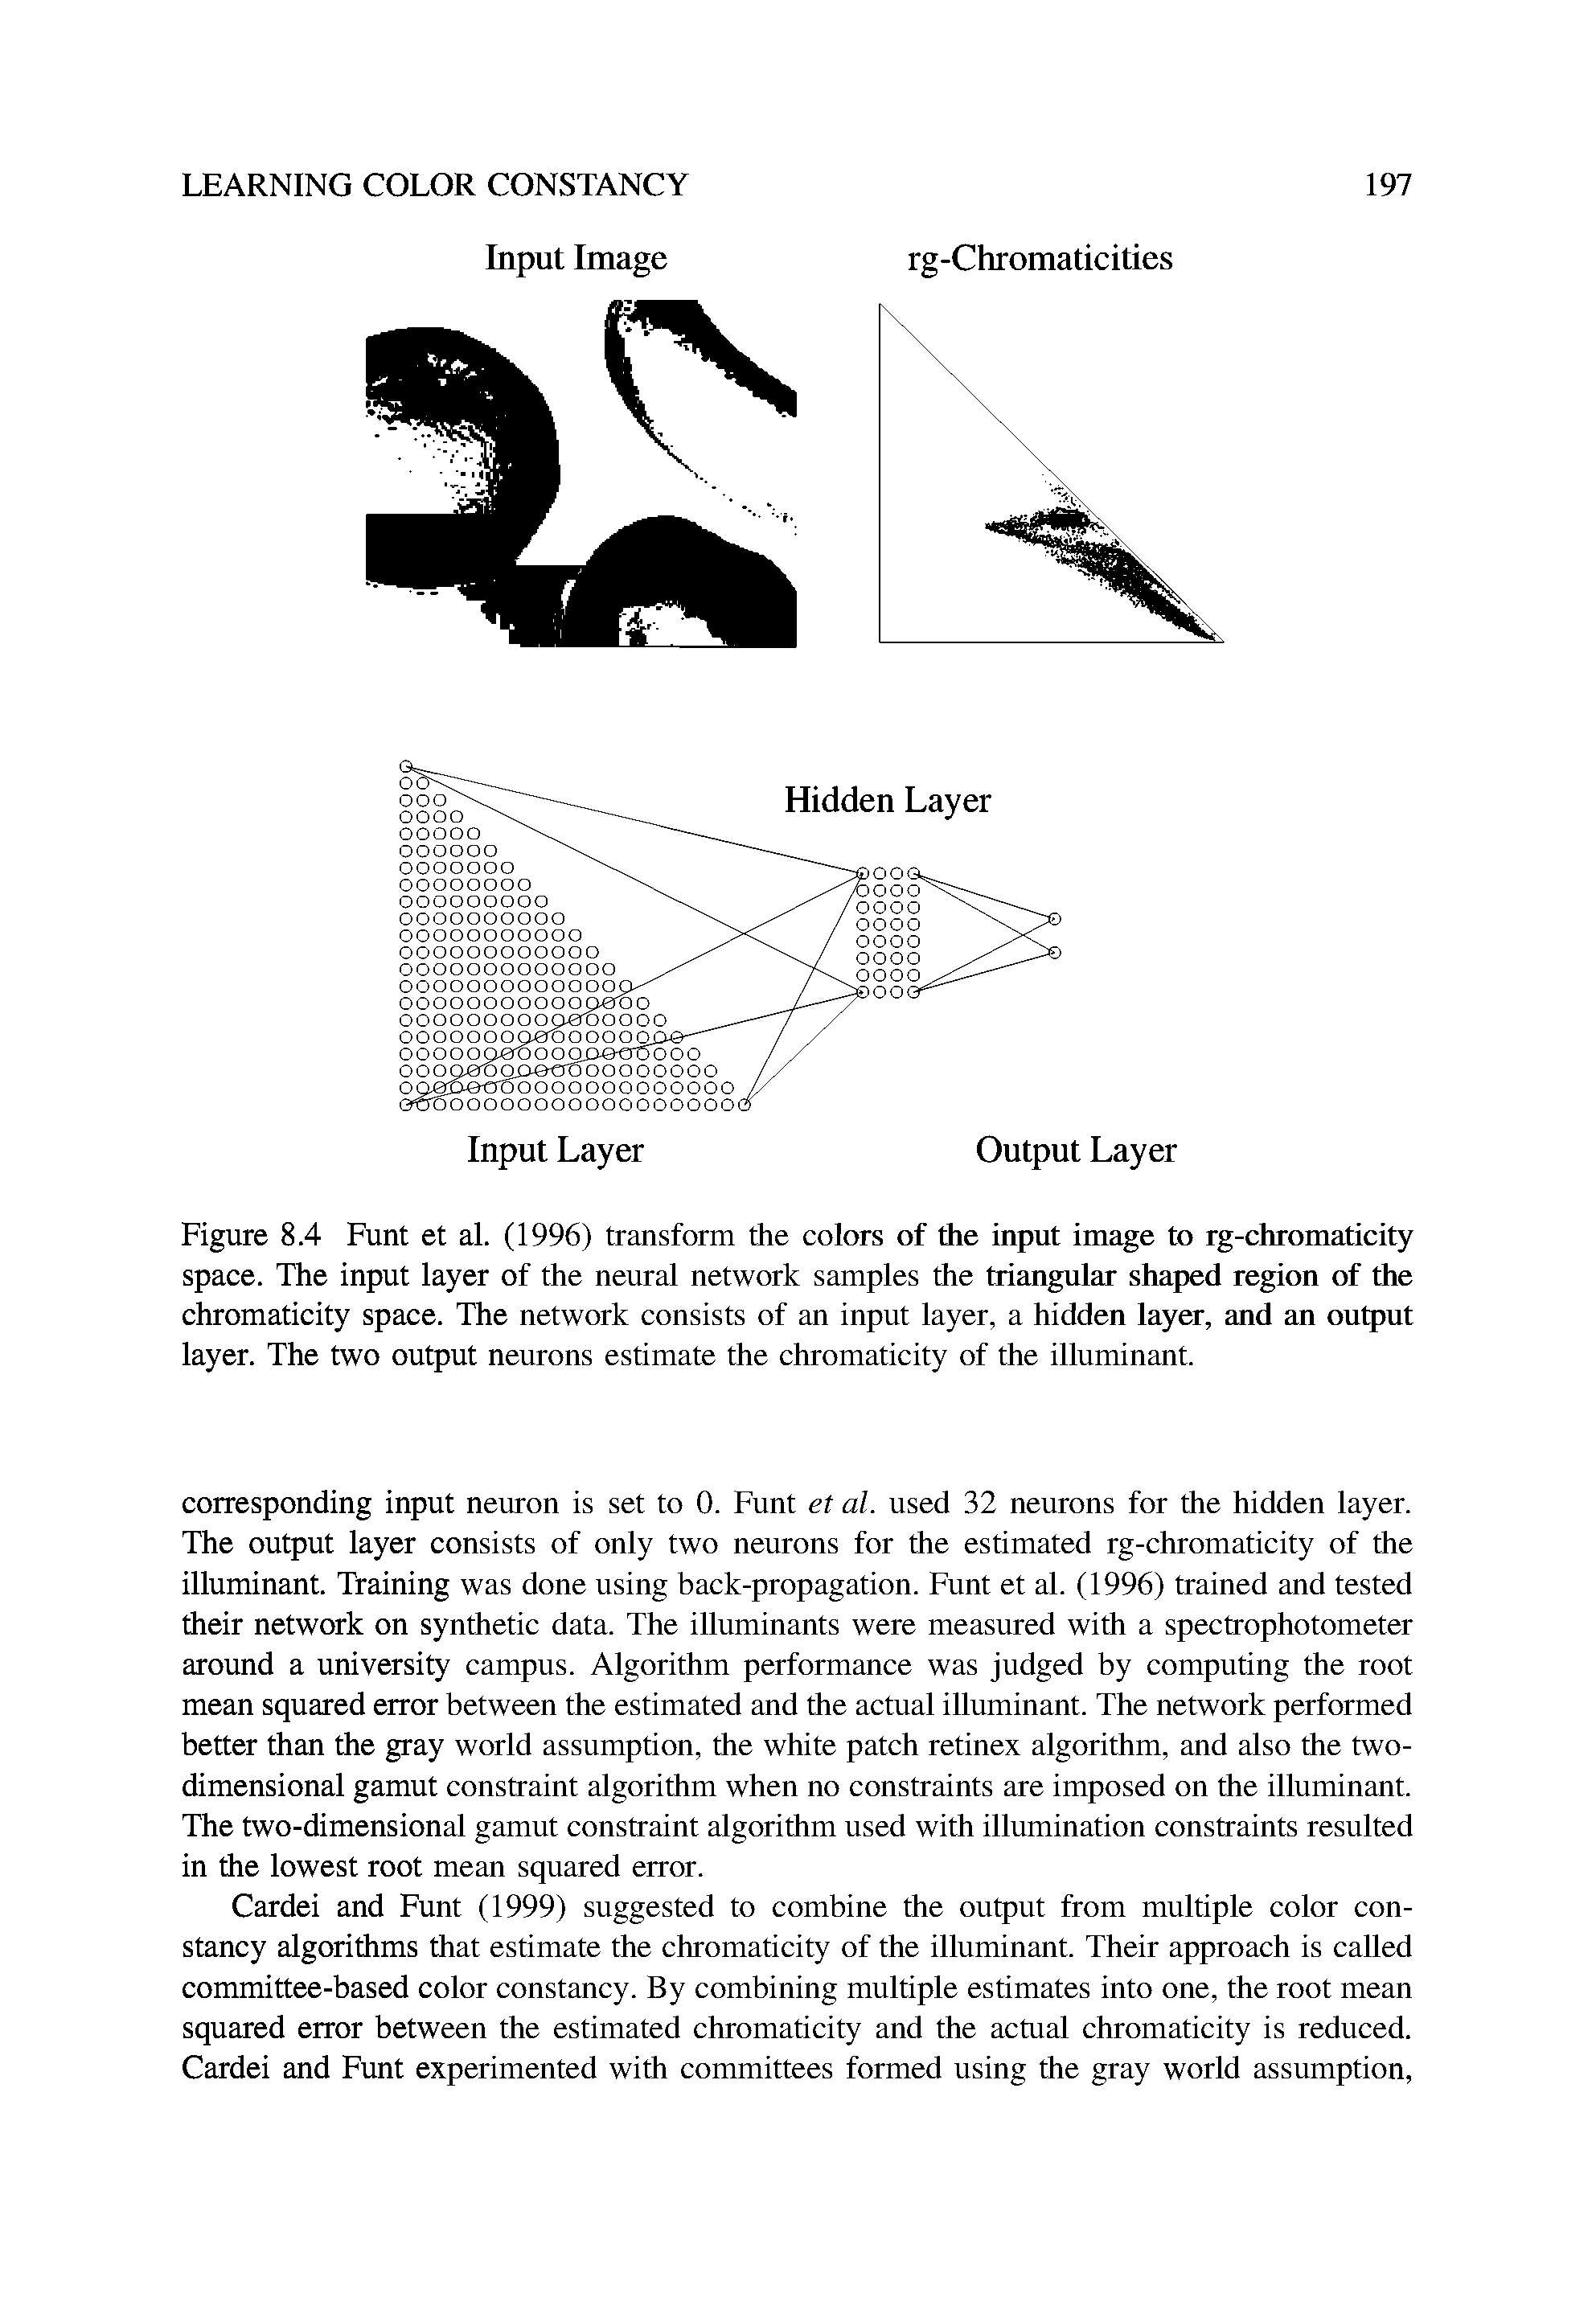 Figure 8.4 Funt et al. (1996) transform the colors of the input image to rg-chromaticity space. The input layer of the neural network samples the triangular shaped region of the chromaticity space. The network consists of an input layer, a hidden layer, and an output layer. The two output neurons estimate the chromaticity of the illuminant.